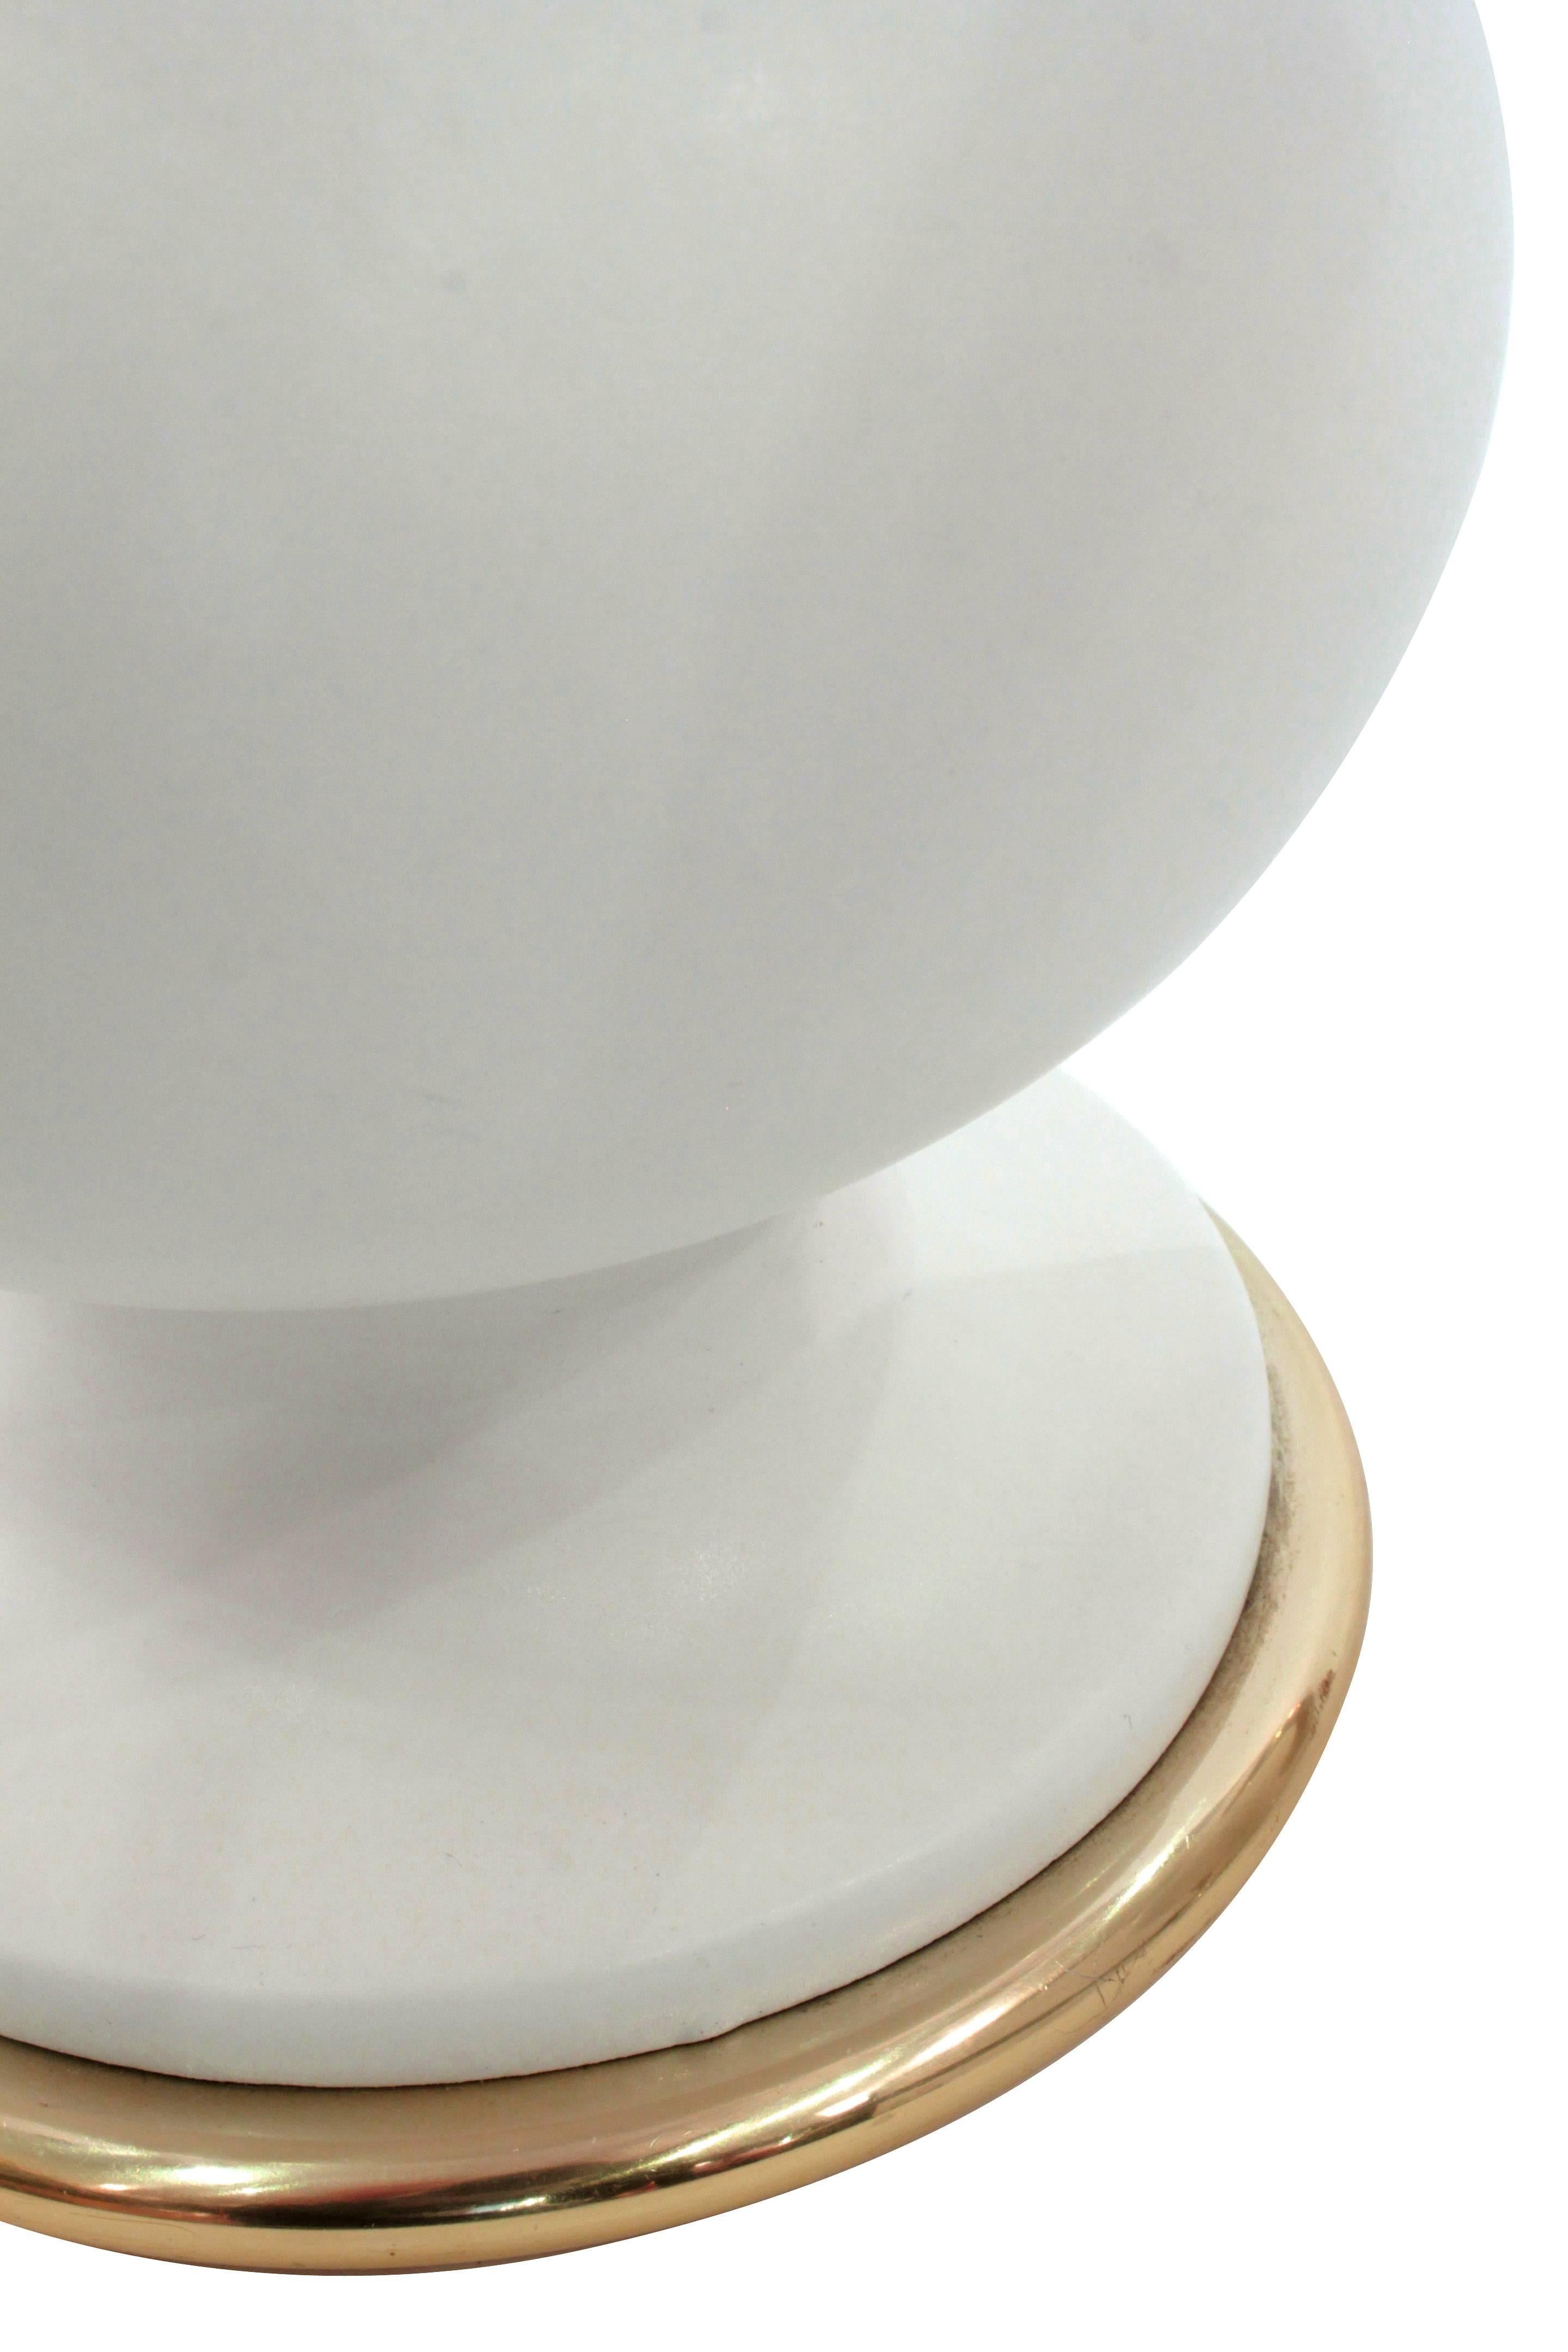 Mid-Century Modern Pair of Sculptural Porcelain Table Lamps by Gerald Thurston for Lightolier